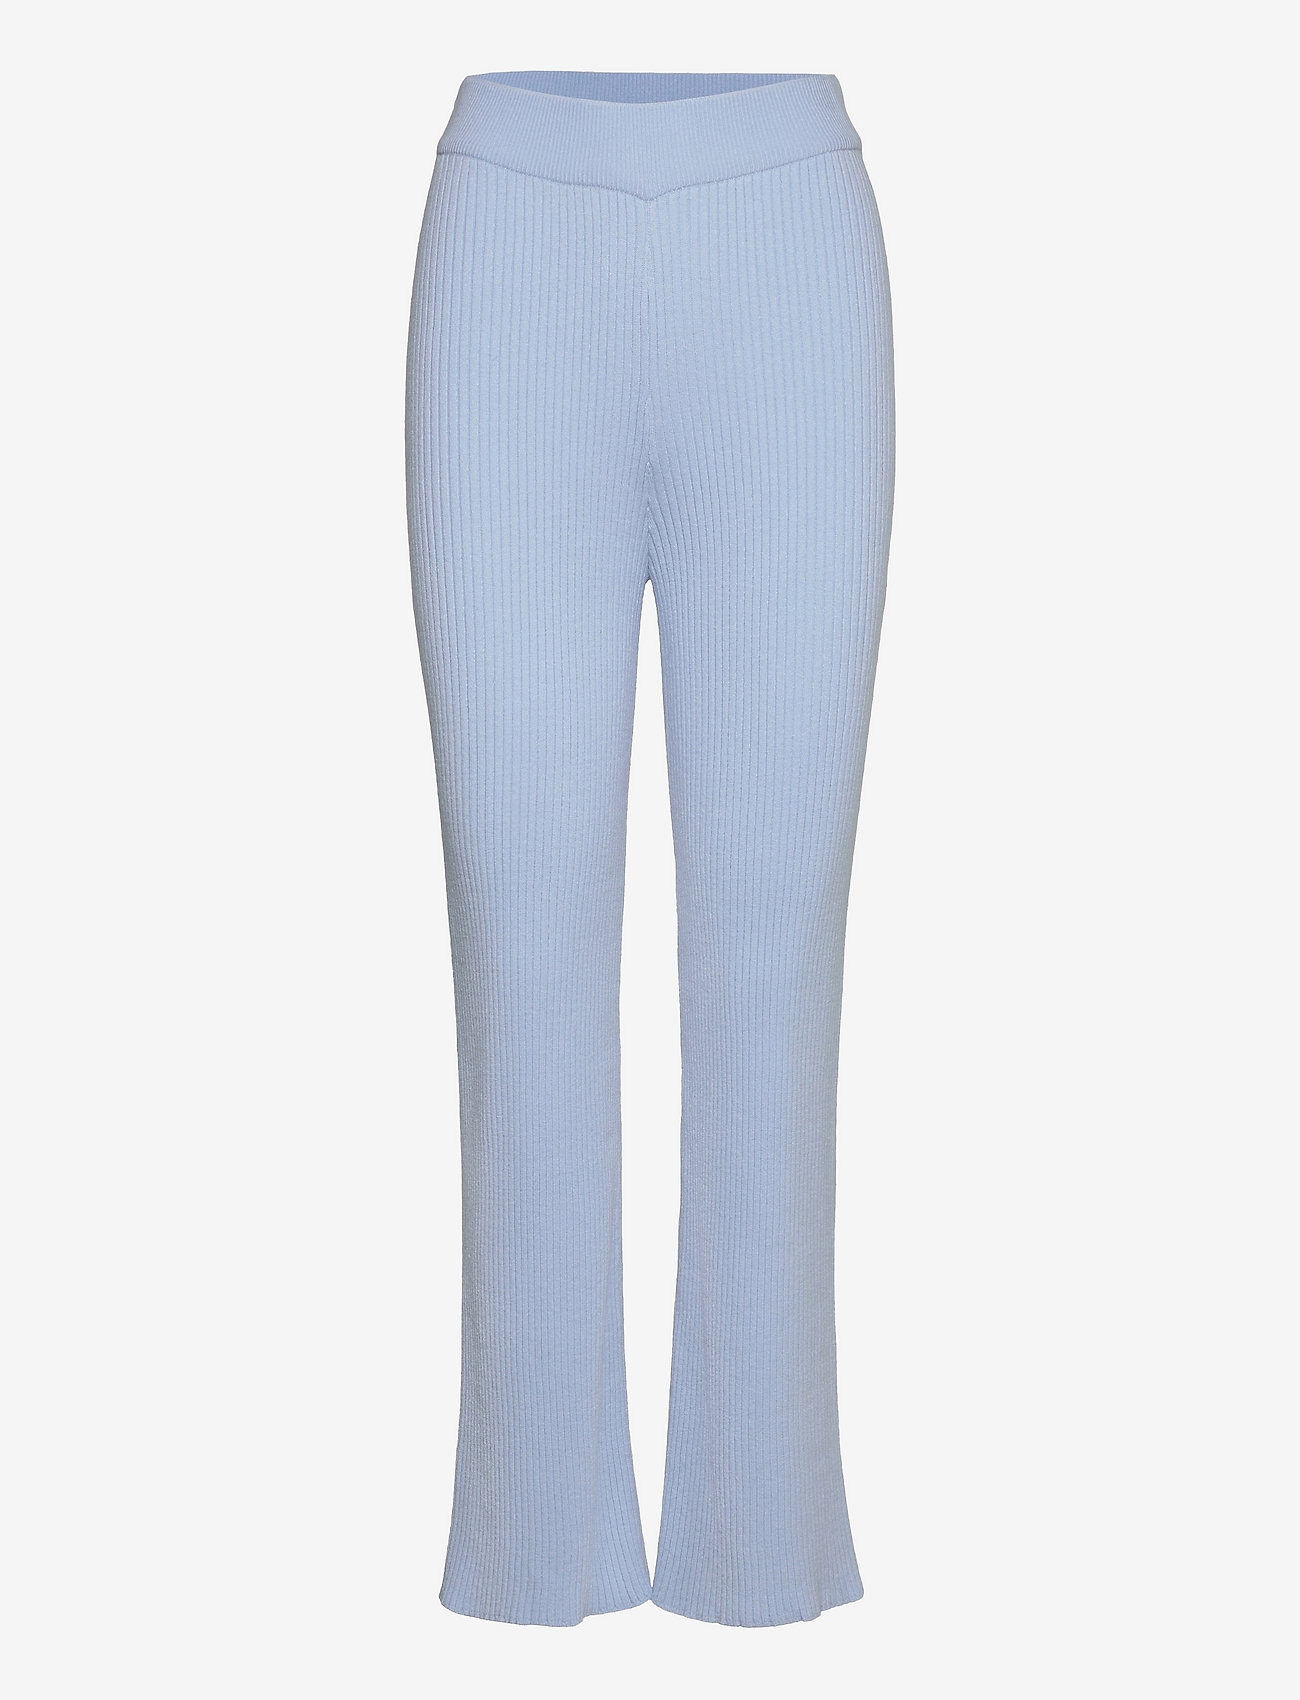 OW Collection - AVERY Pants - women - 026 - blue - 0